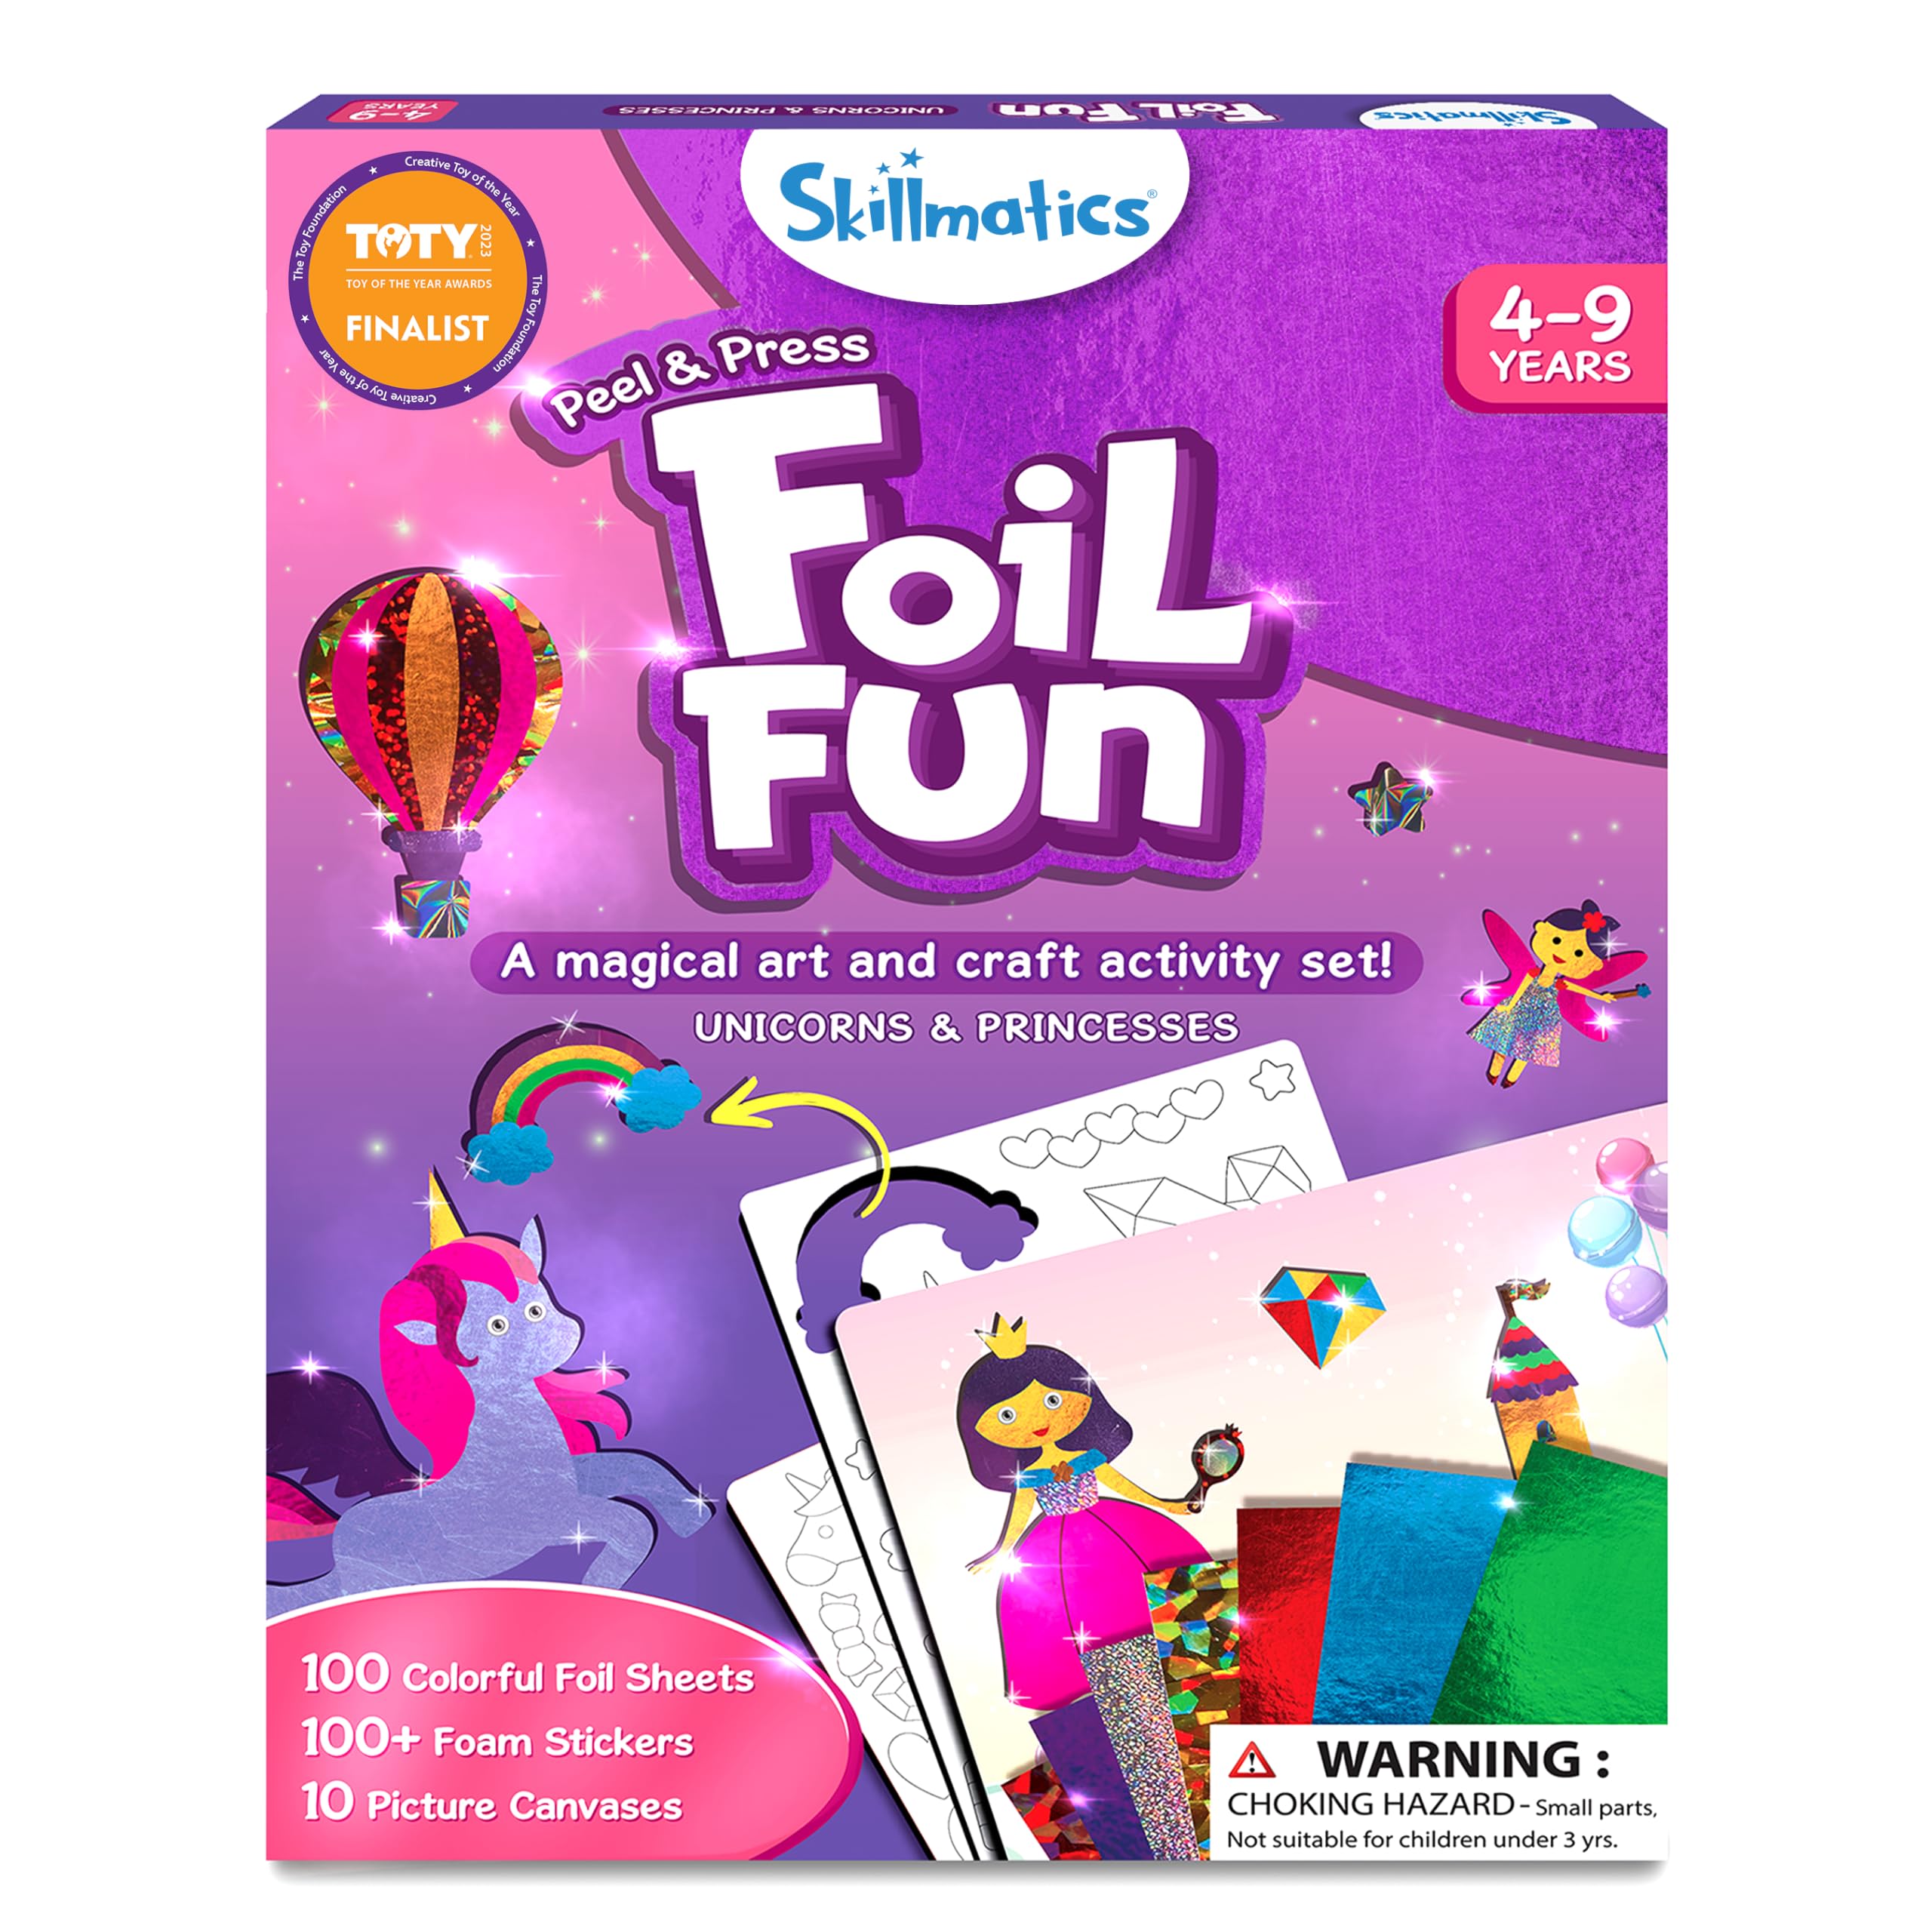 Skillmatics Foil Fun & Magical Scratch Art Book Unicorns & Princesses Theme Bundle, Art & Craft Kits, DIY Activities for Kids, Gifts for Ages 4 and Up